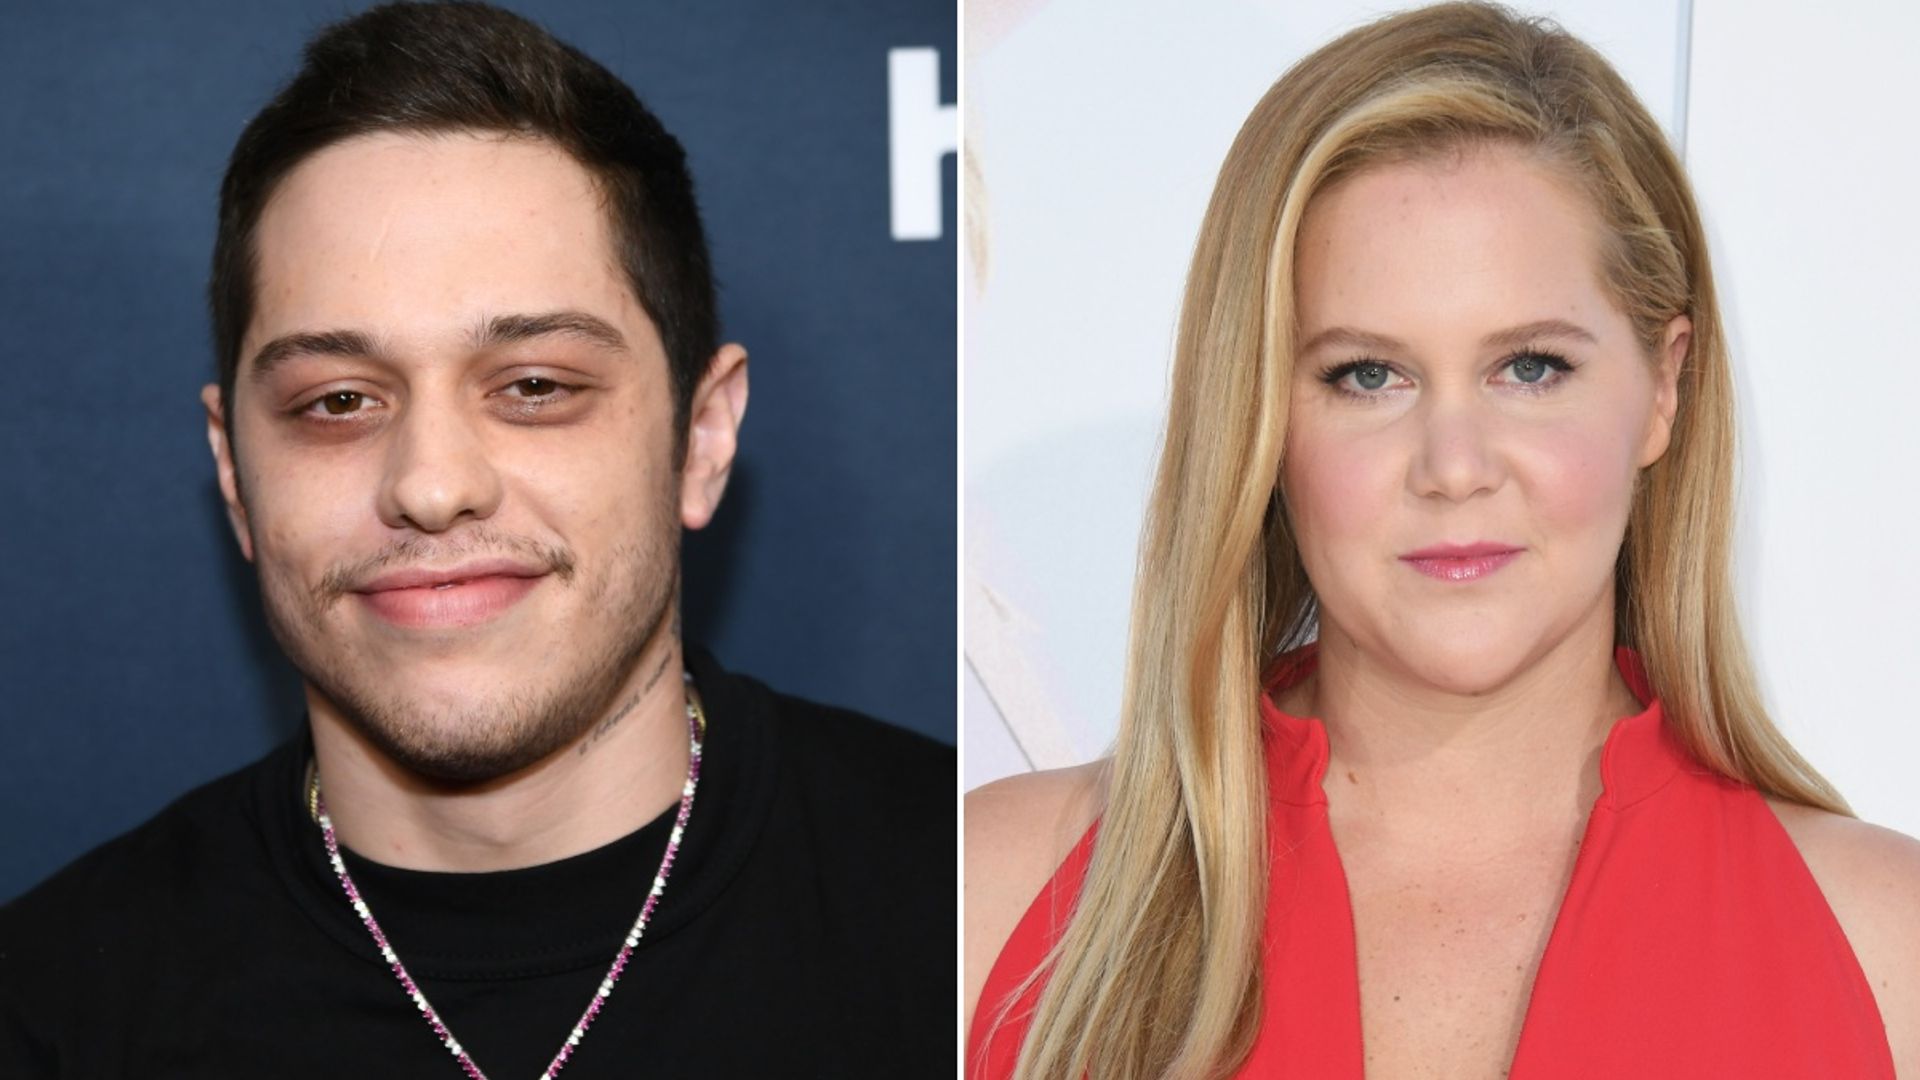 Jimmy Fallon, Pete Davidson and Amy Schumer among comedians to honor 9/11 20th anniversary with special event